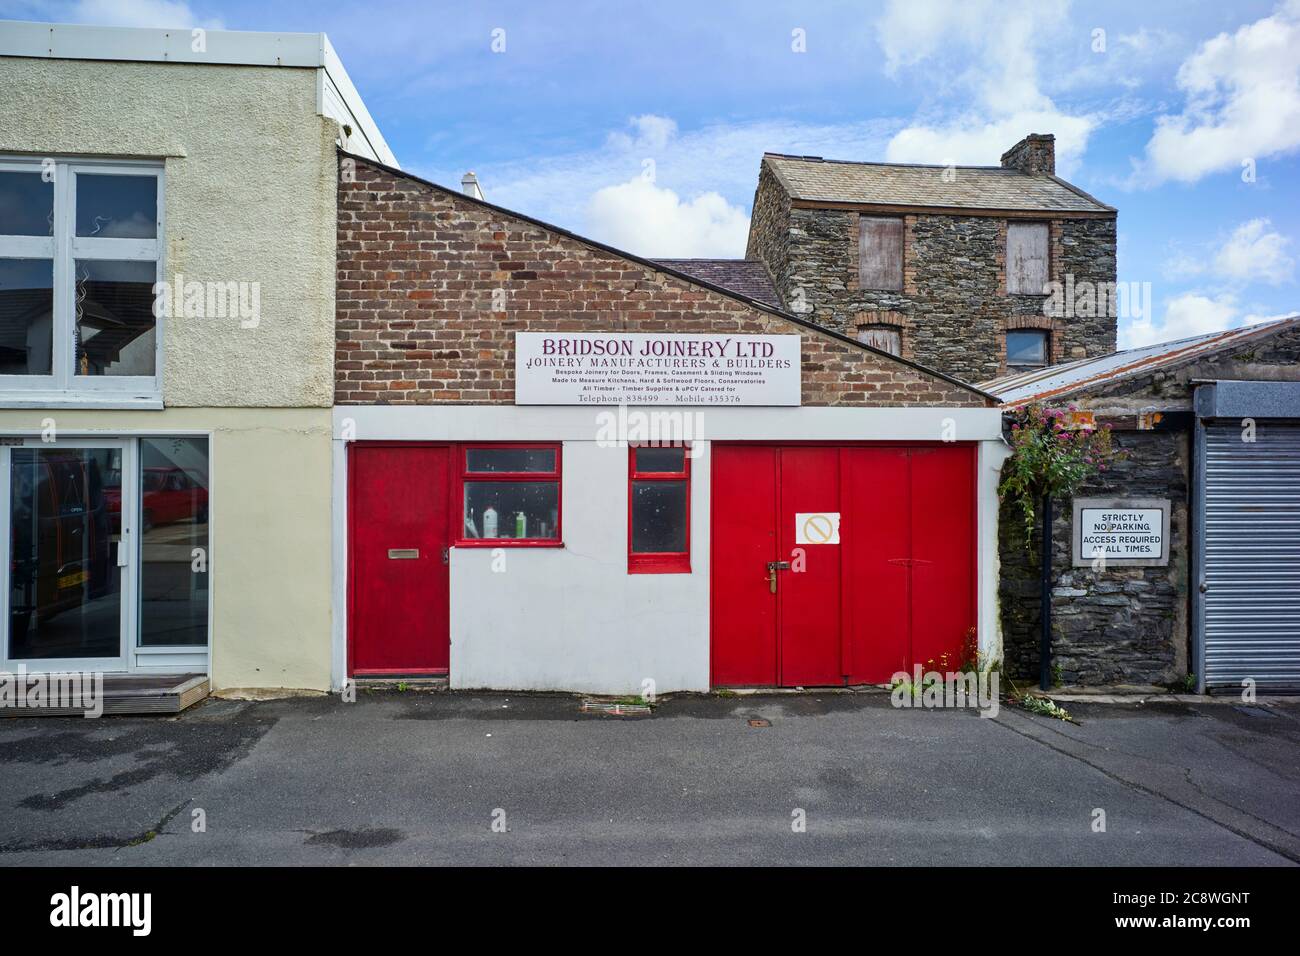 Bridson Joinery Limited in Port Erin, Isle of Man Stock Photo